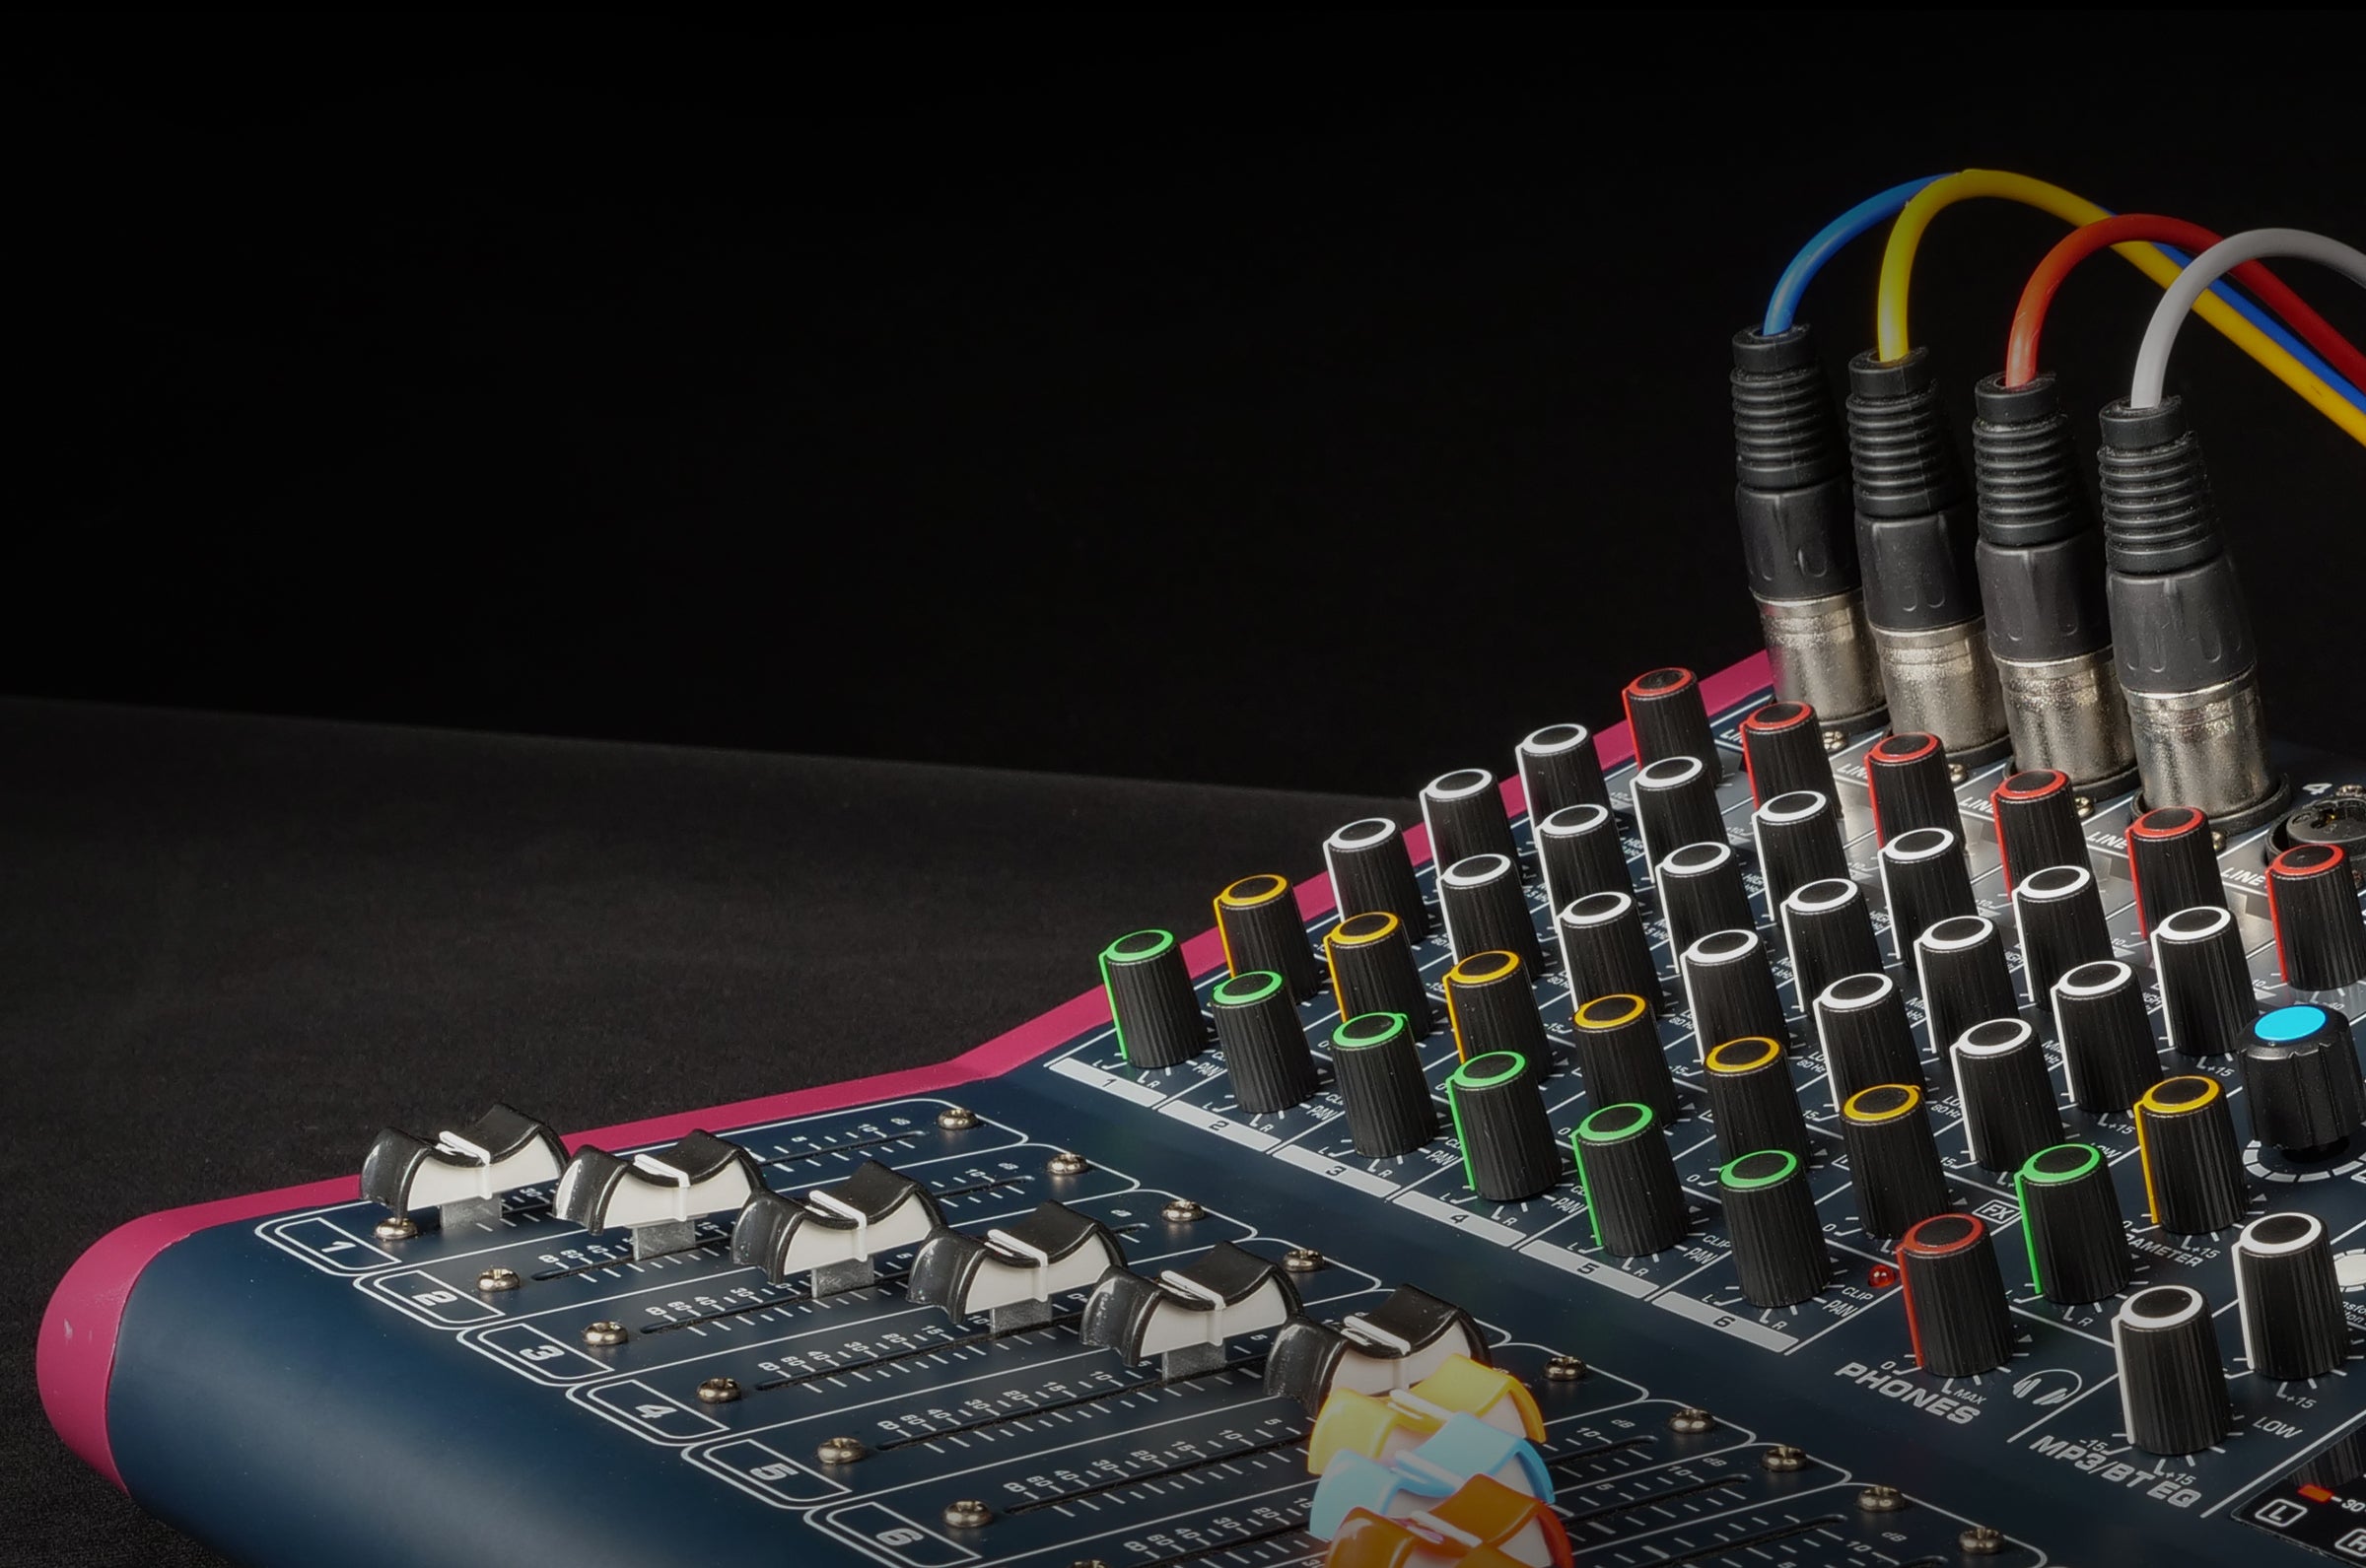 How to Use PC Function for the PTX20/PTX-30 Mixer